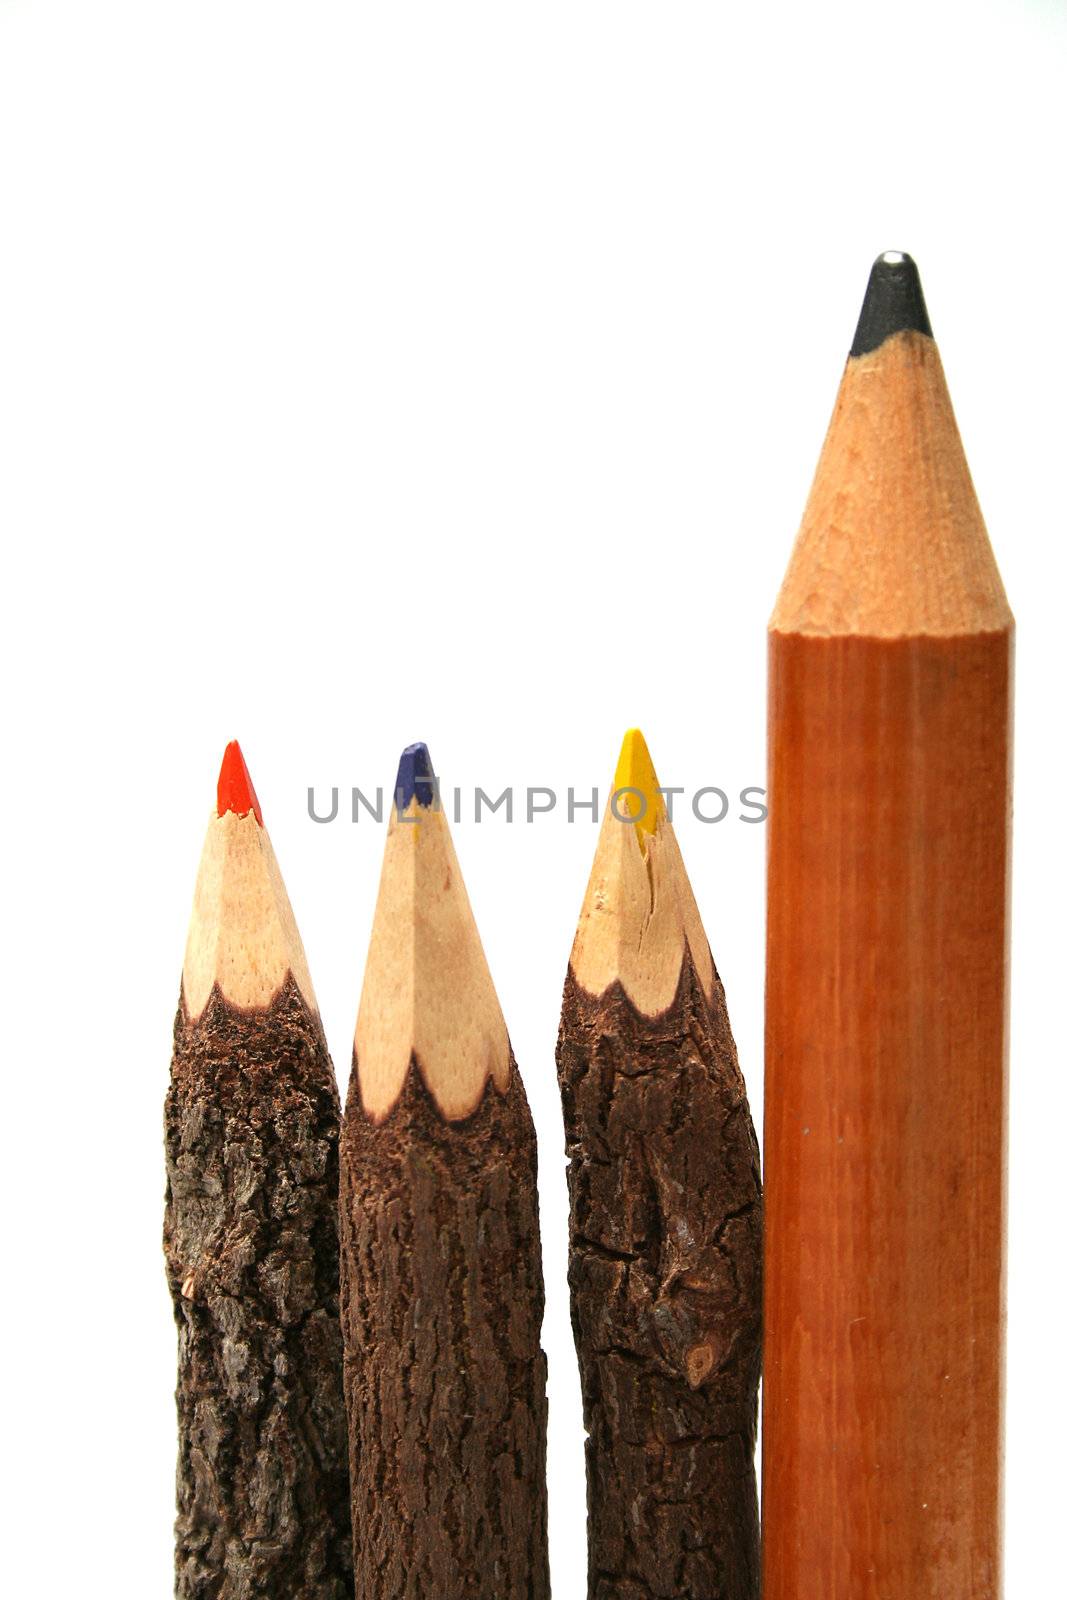 Three unusual pencils made of natural wood and one simple huge pencil vertical